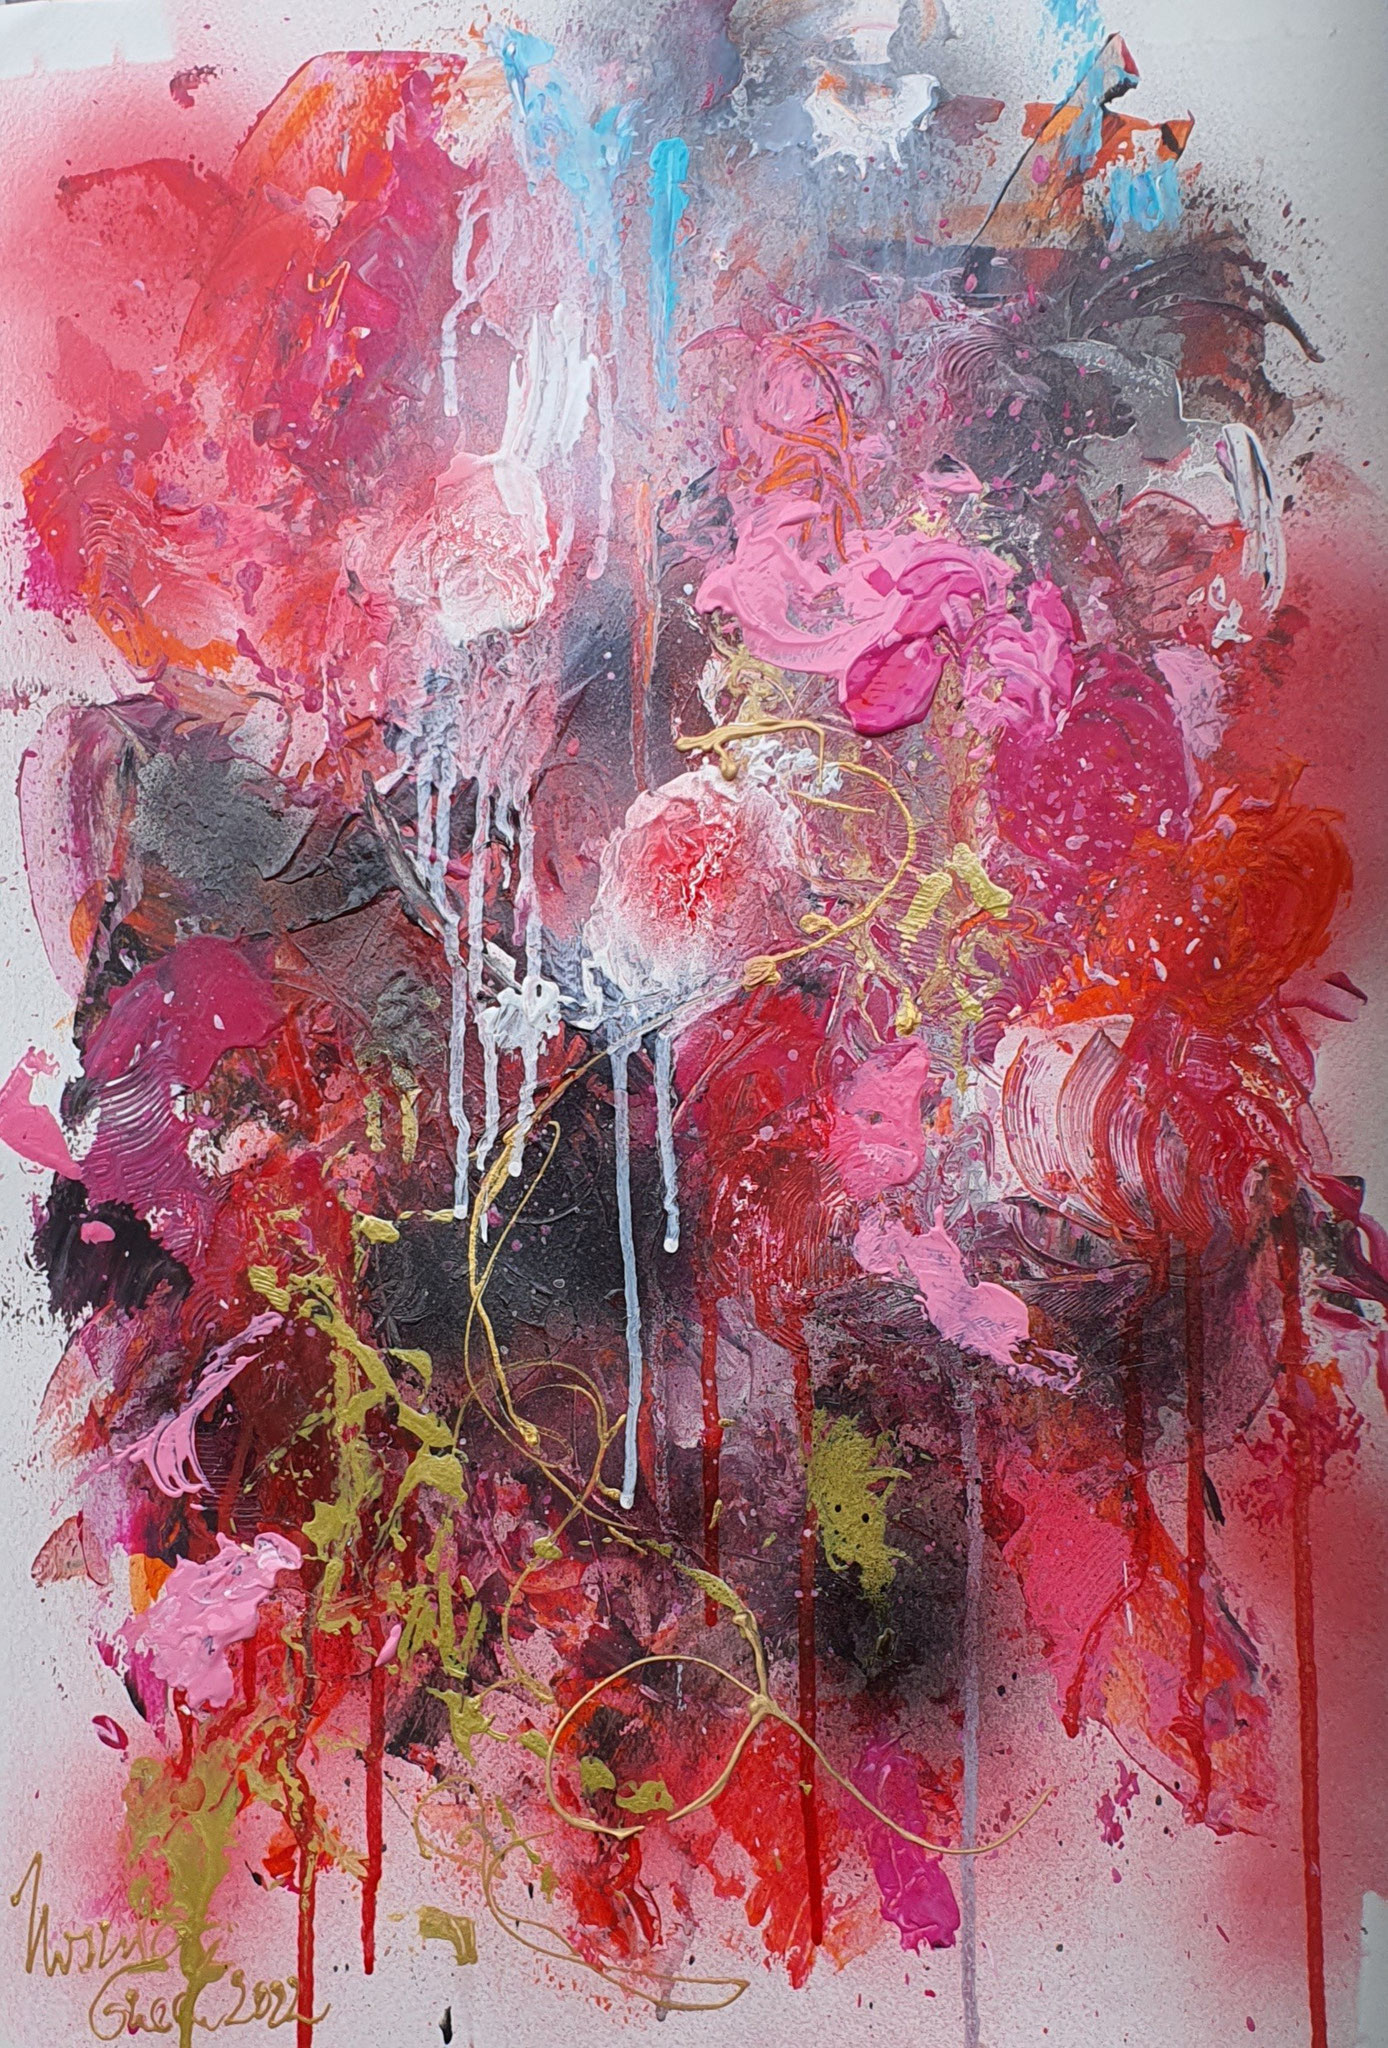 "It's raining red roses for us" (Technic: Acryl/Gesso Mixed Media on Paper 38 X 55,5 X 0,2 cm)